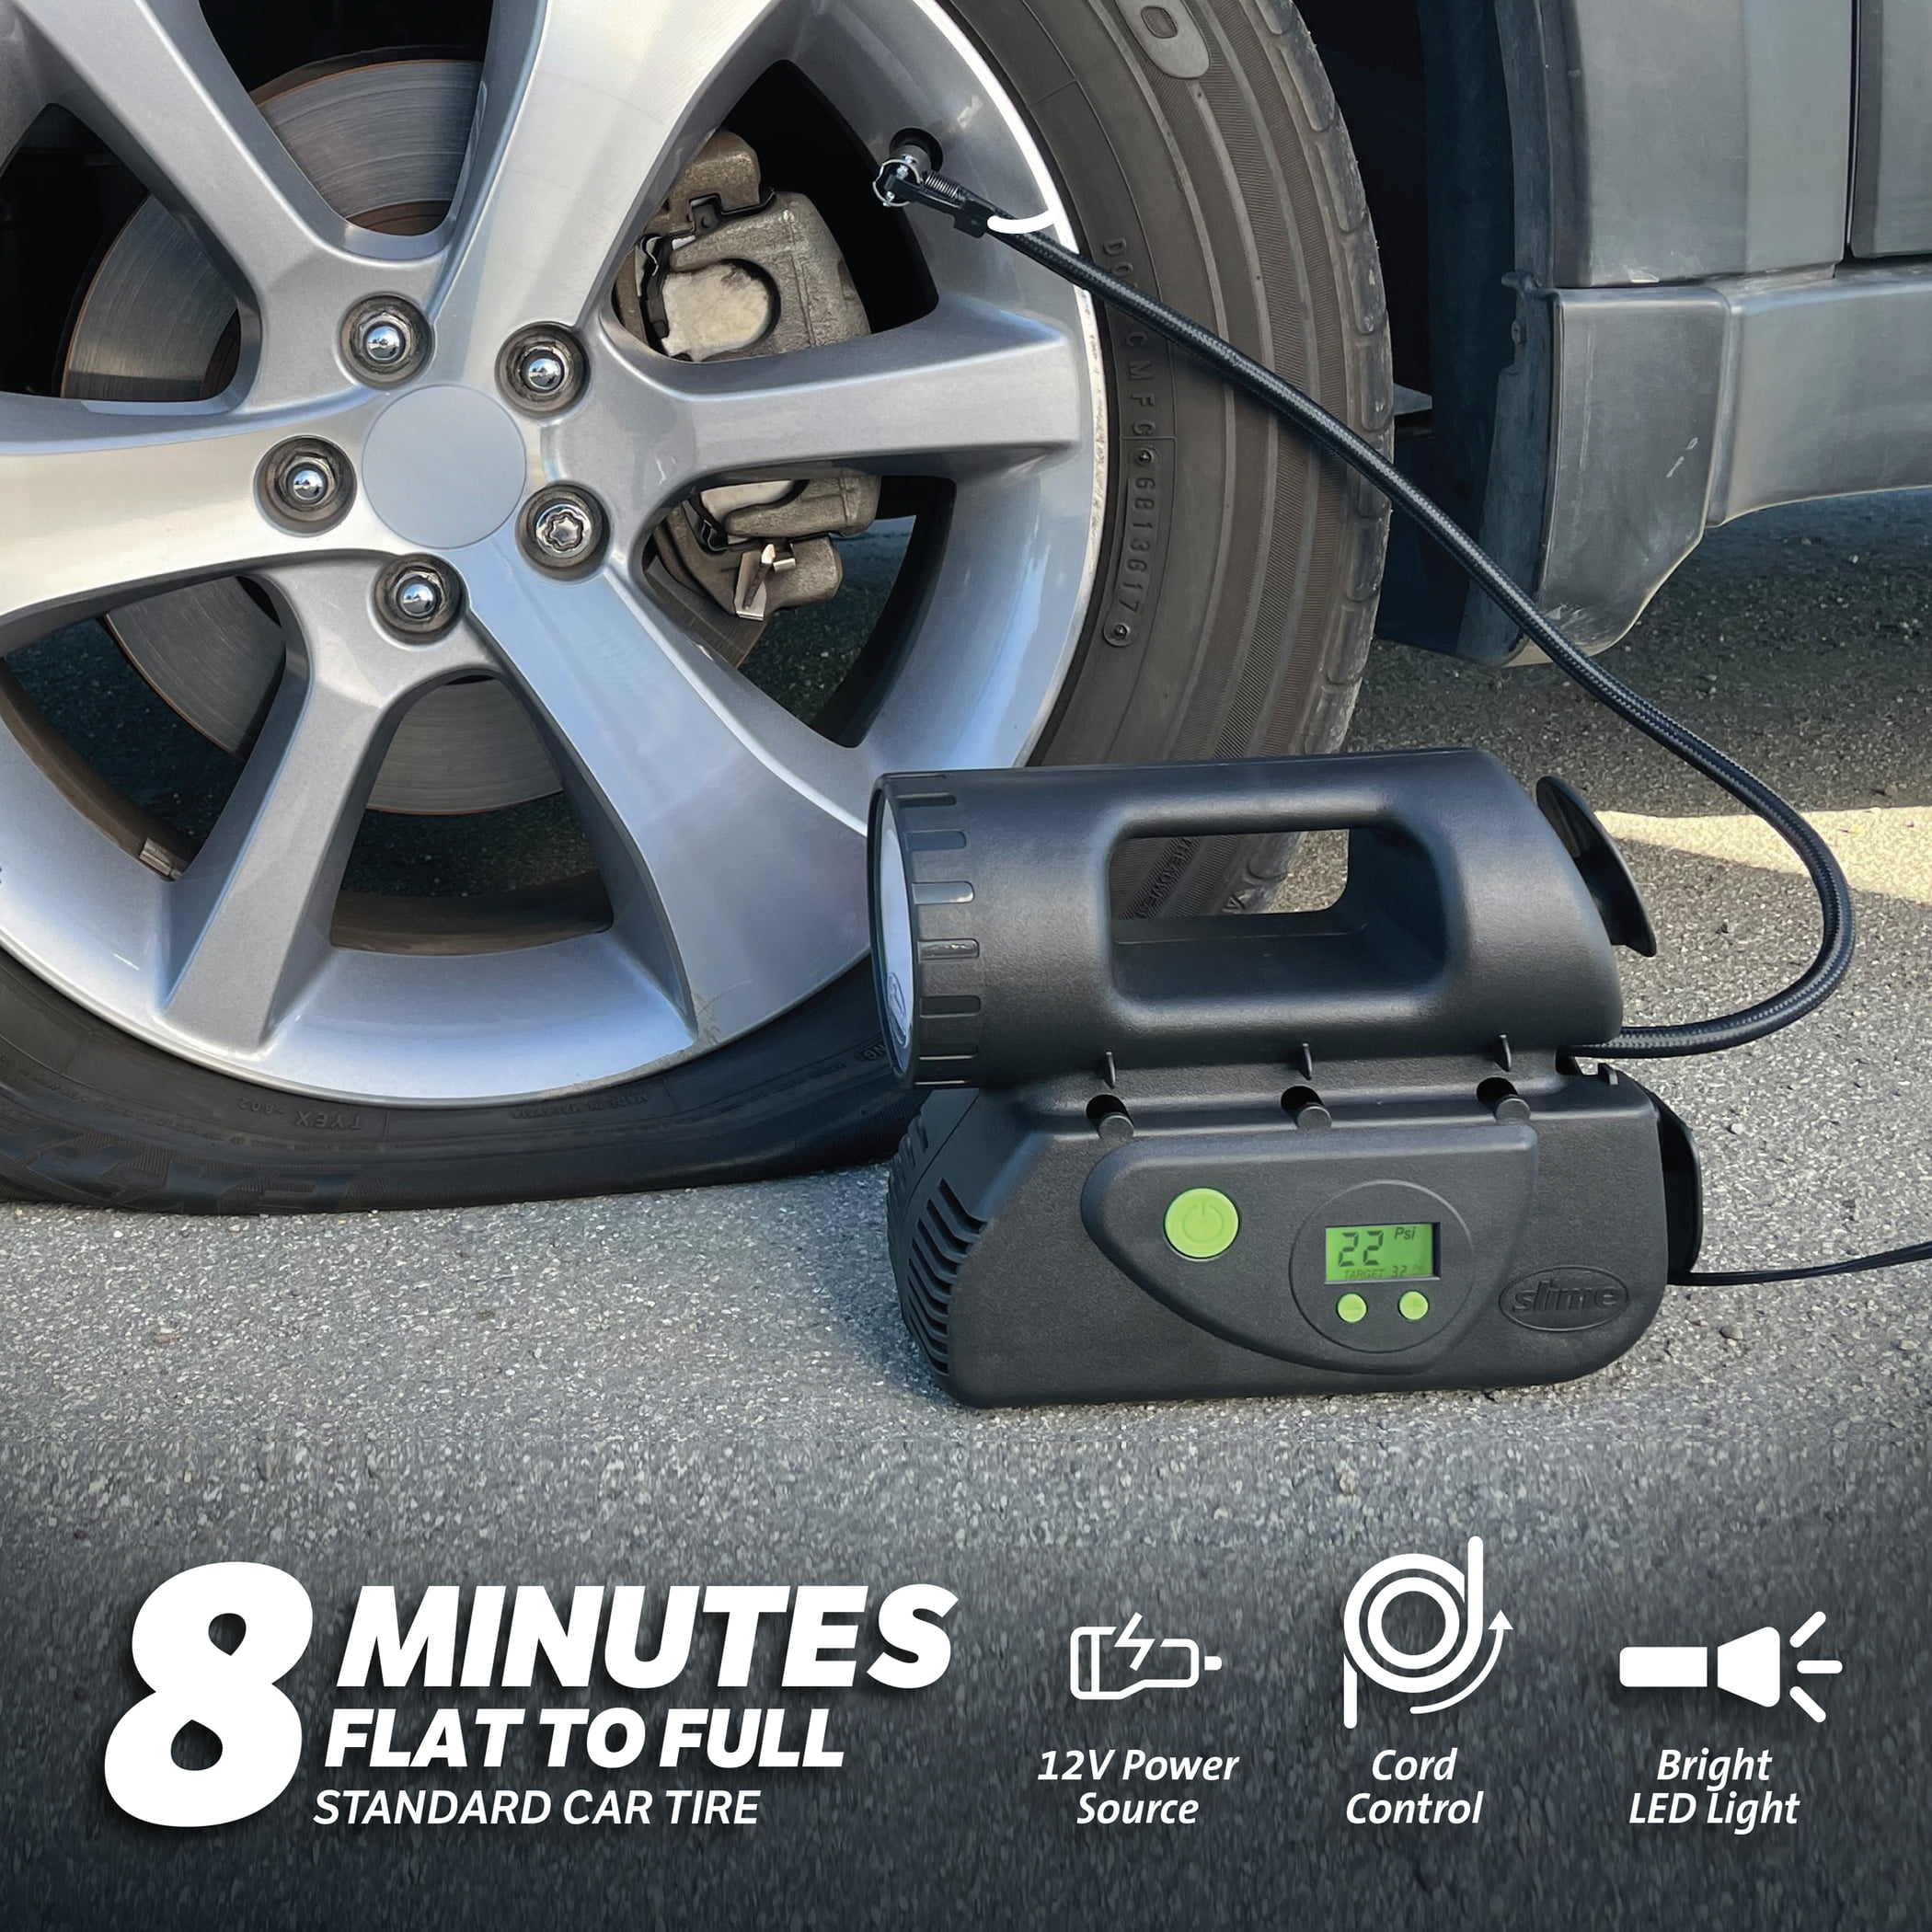 Slime Deluxe Digital 12v Tire Inflator Inflates a standard tire in 4 minutes- 40067